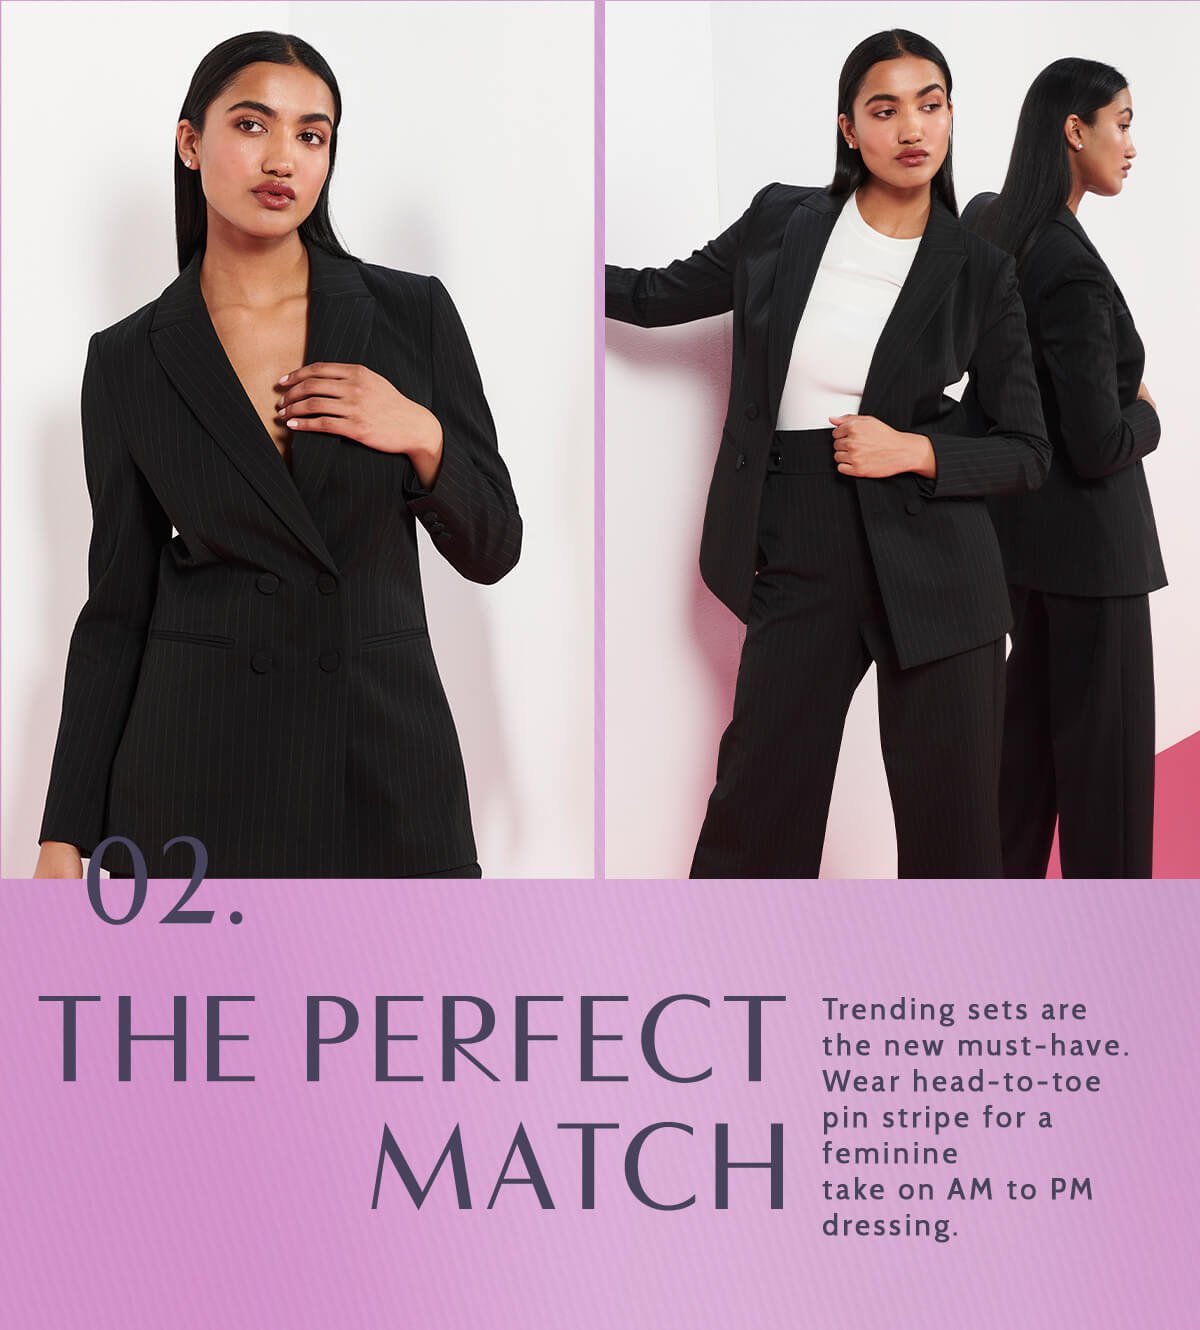 02. The Perfect Match. Trending sets are the new must-have. Wear head-to-toe pin stripe for a feminine take on AM to PM dressing.